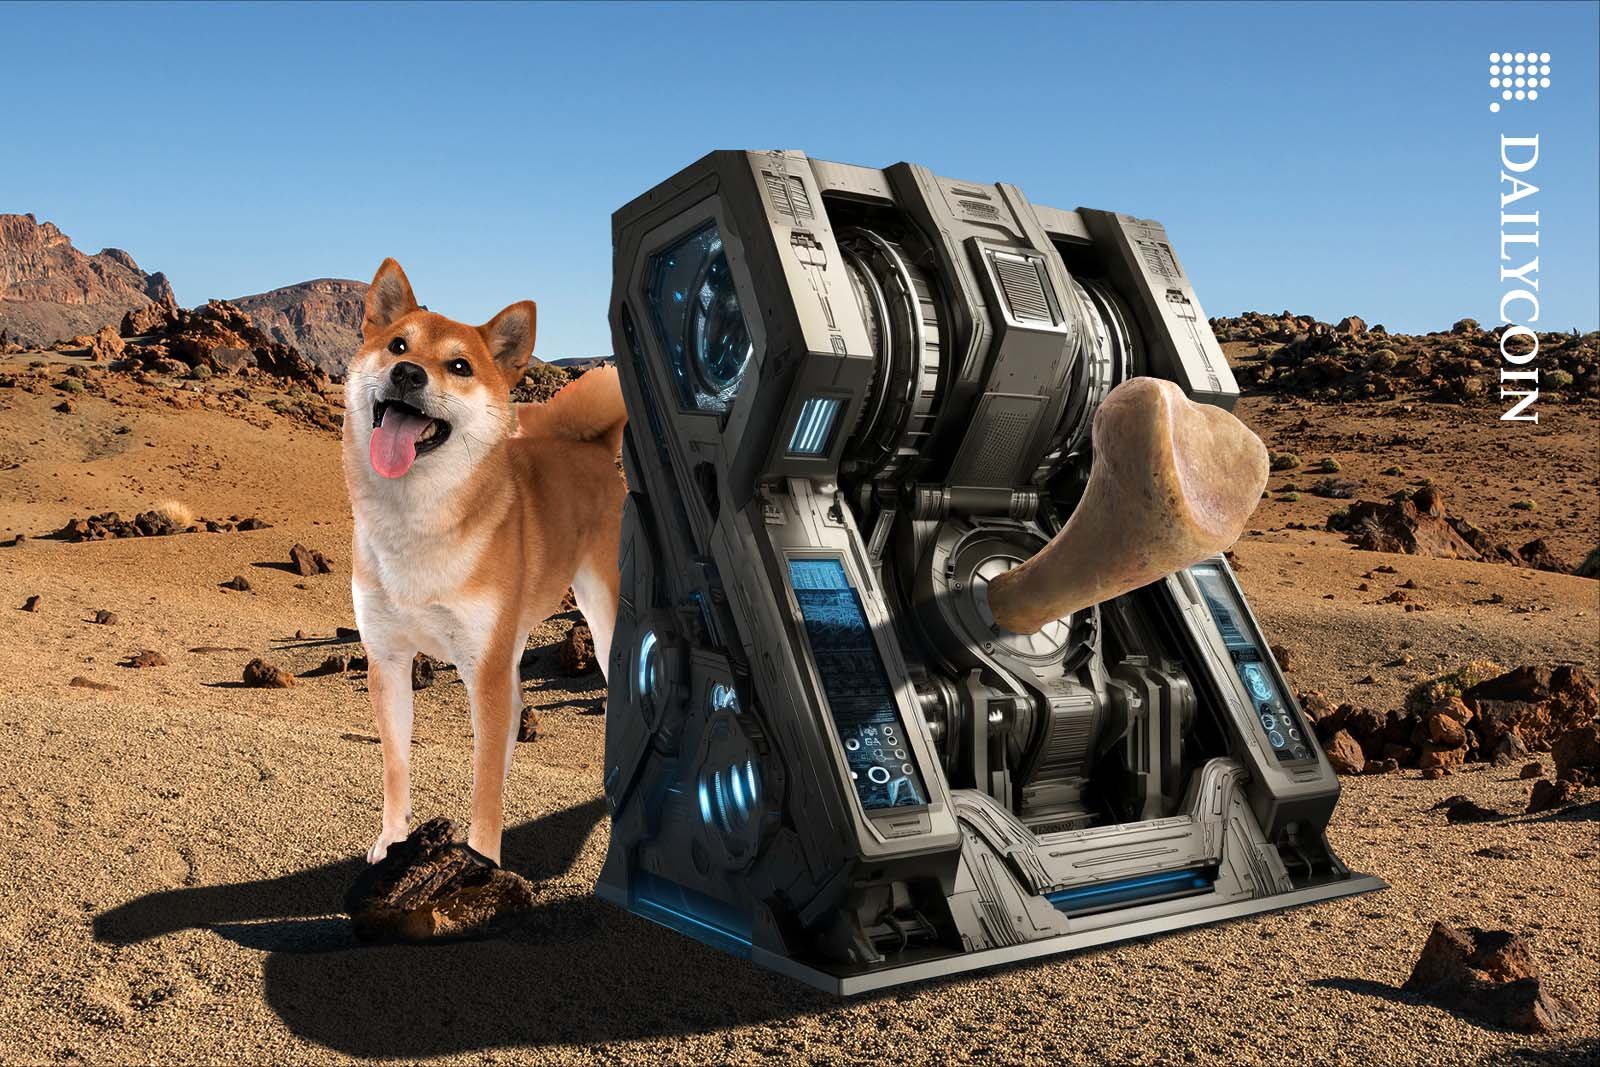 Smiling Shiba Inu dog in the desert standing next to a huge robot spitting out a large bone.